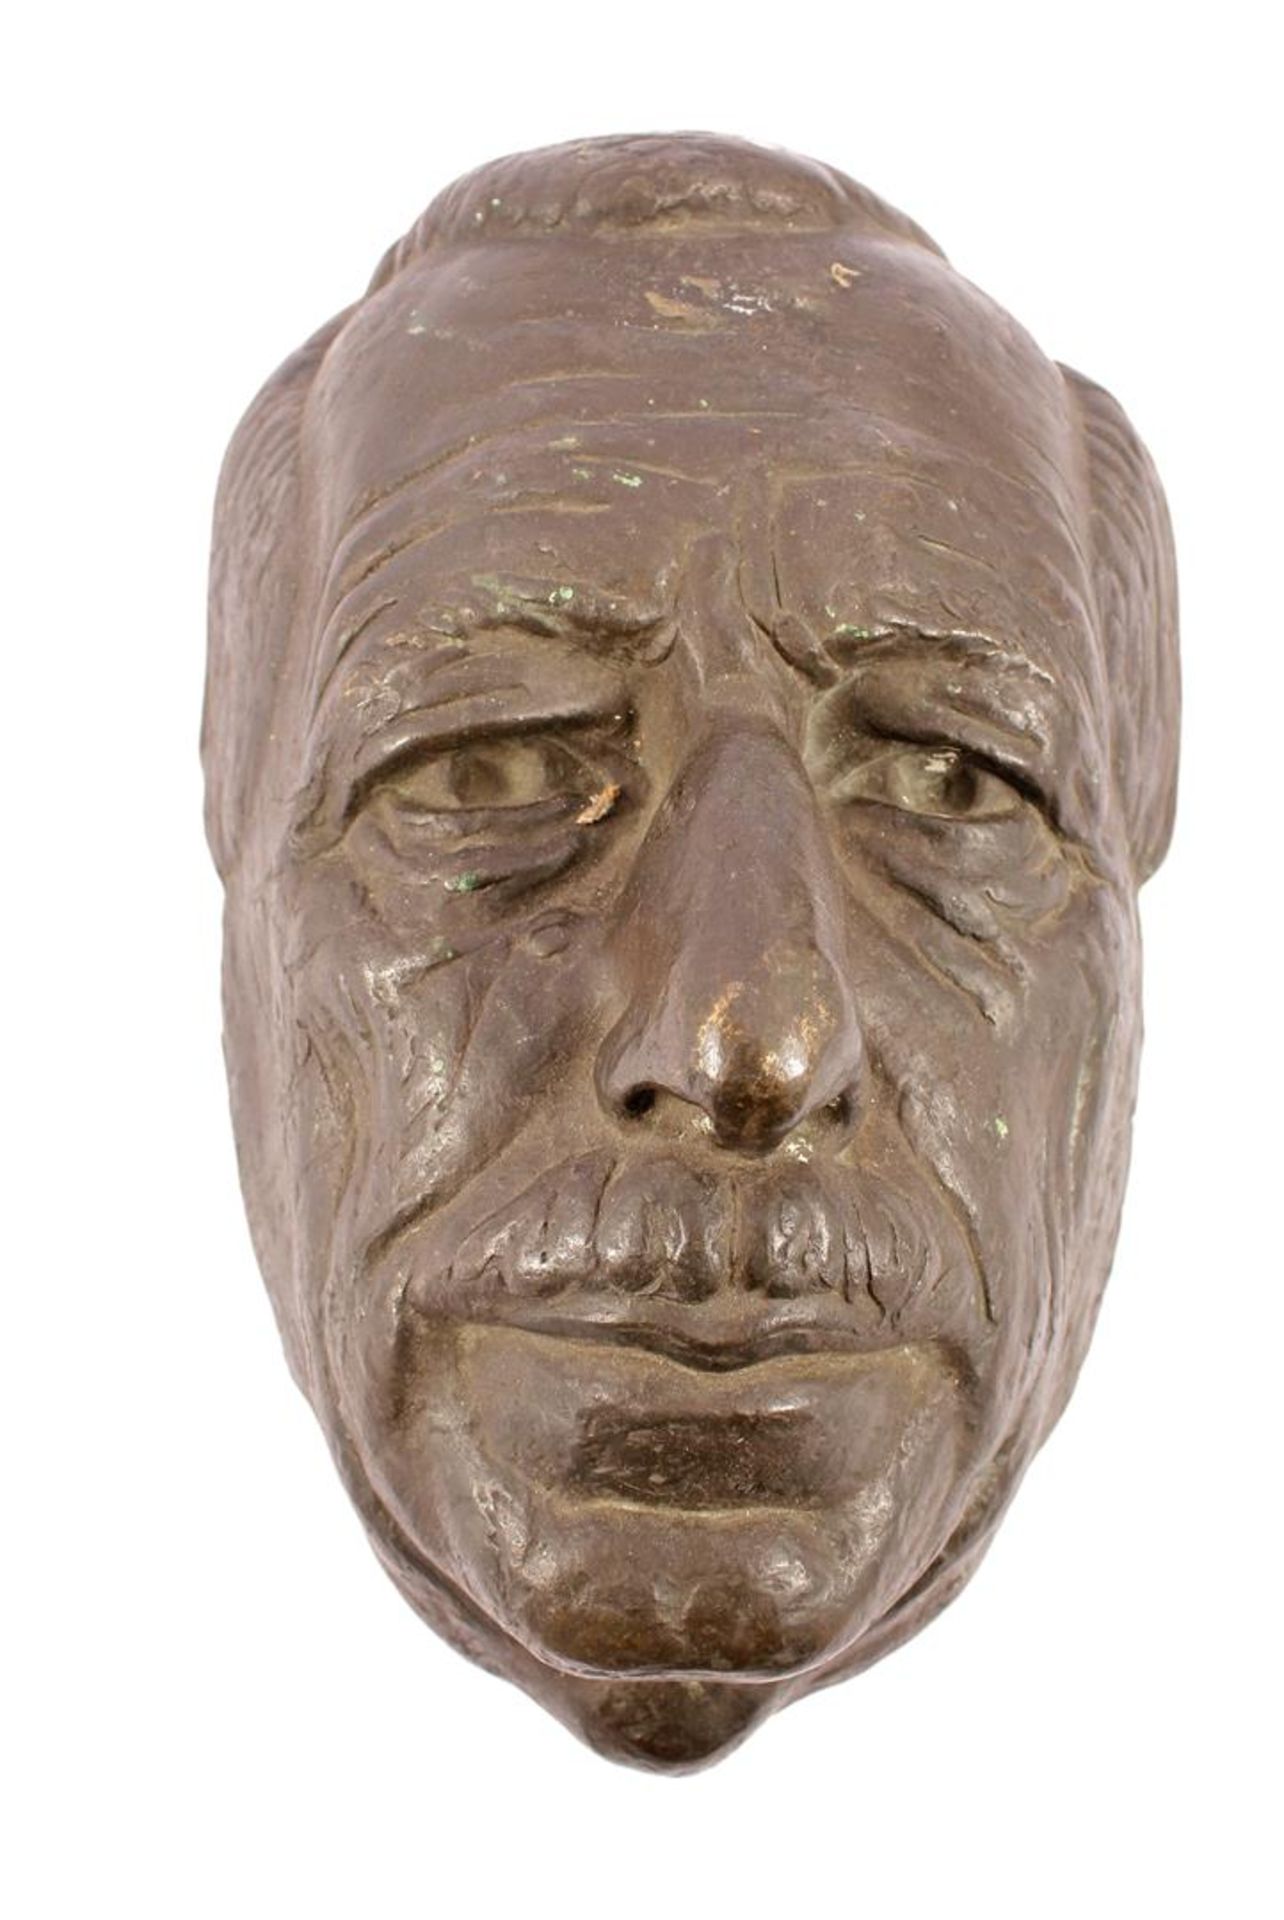 Anonymous, bronze mask of a man, 33x21.5 cm, 4600 grams